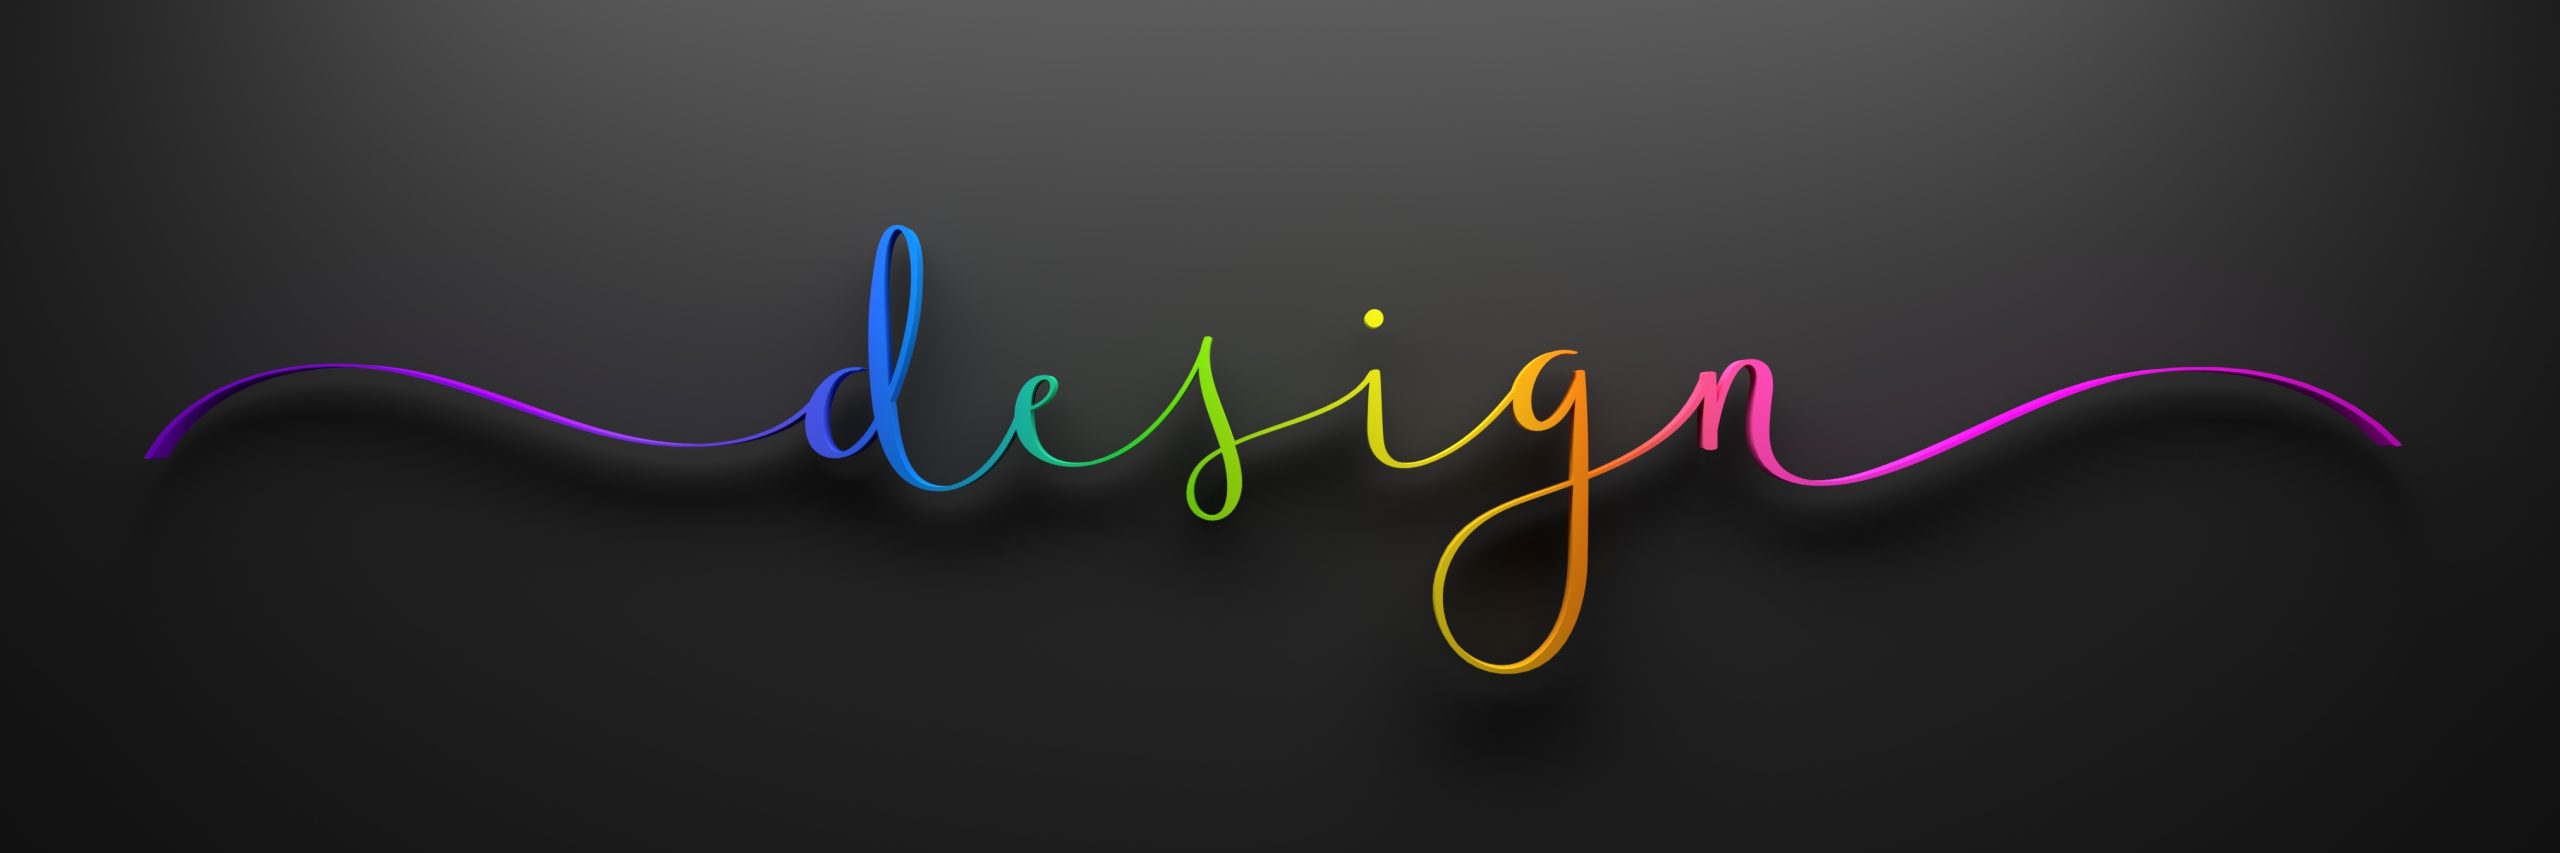 3D Render of rainbow-colored DESIGN brush calligraphy on dark background